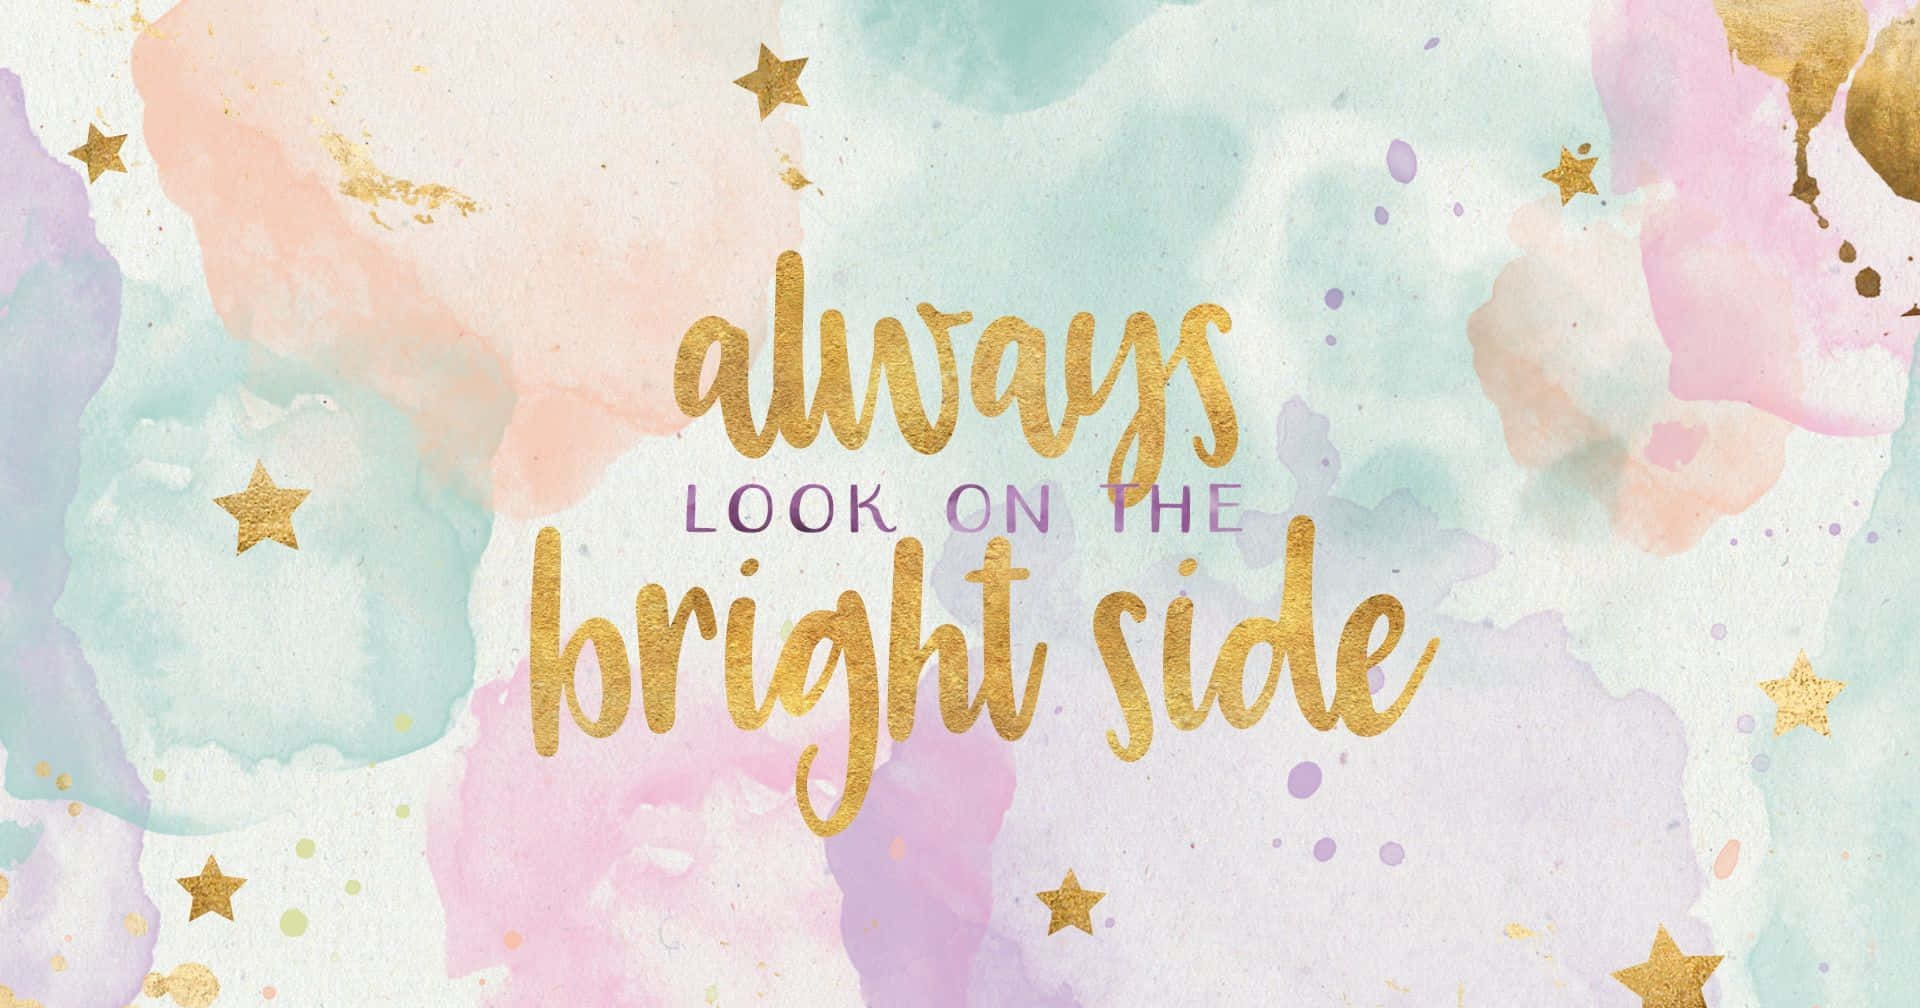 Always Look On The Bright Side Wallpaper